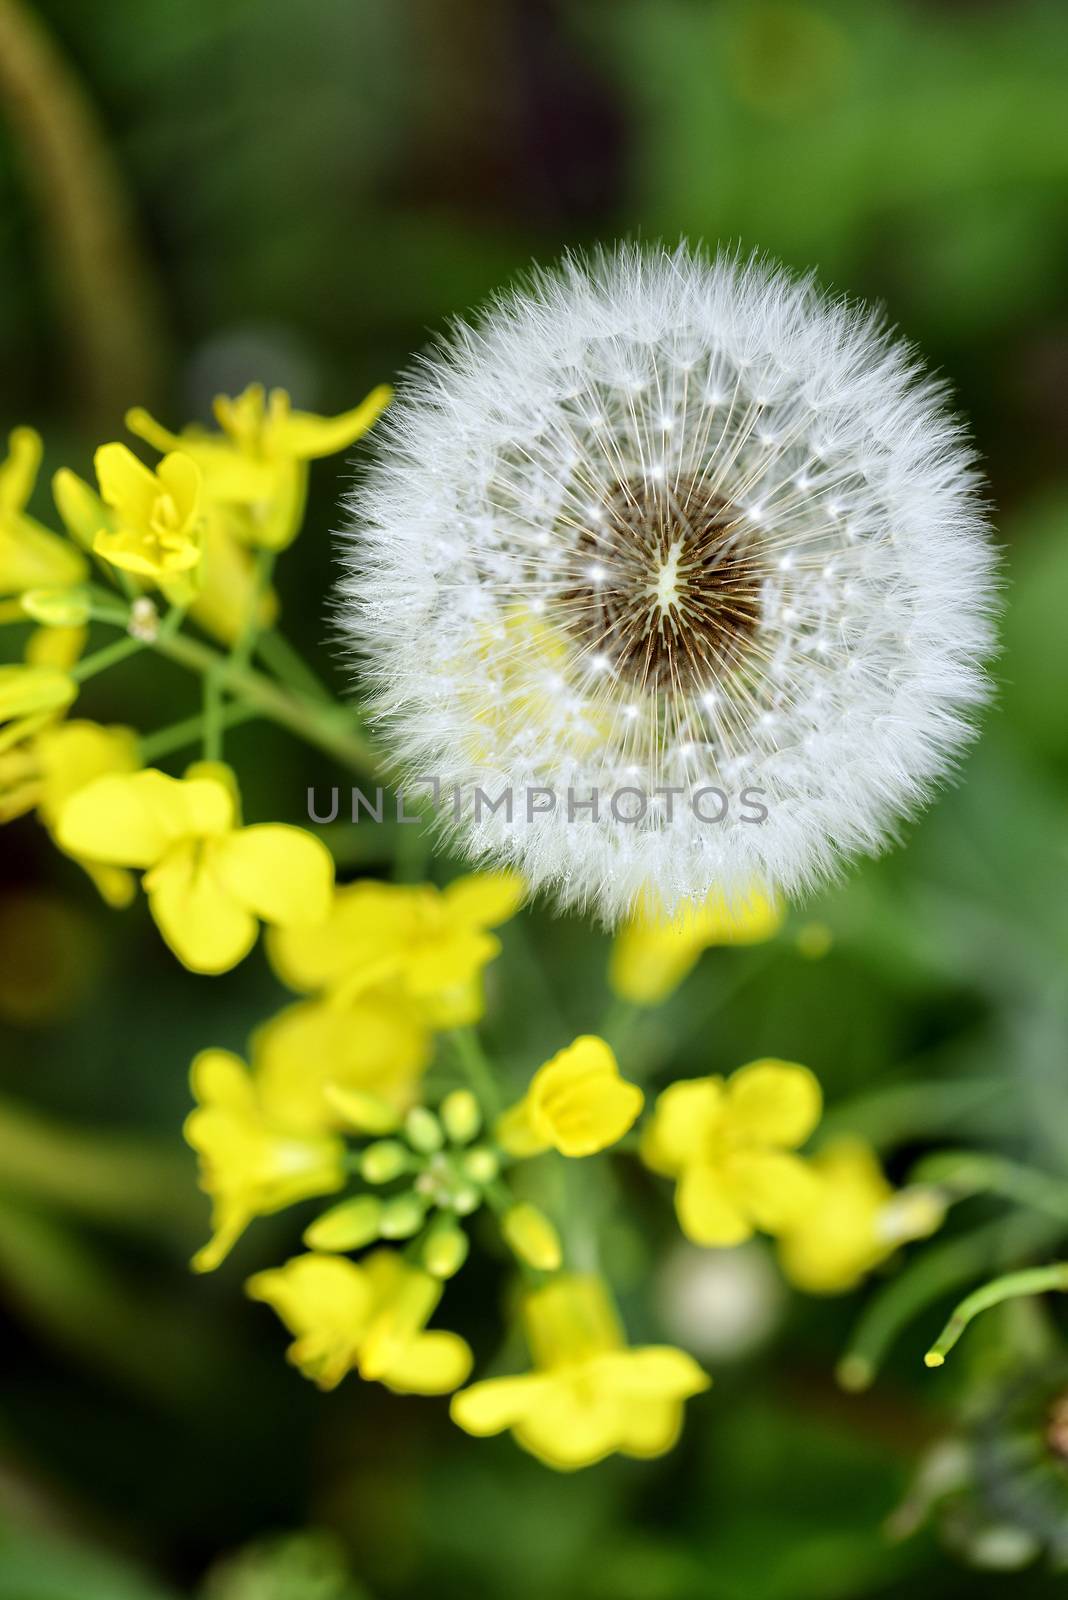 Selective focus close-up photography. It is flowering dandelion with white fuzz growing canola field. by askoldsb